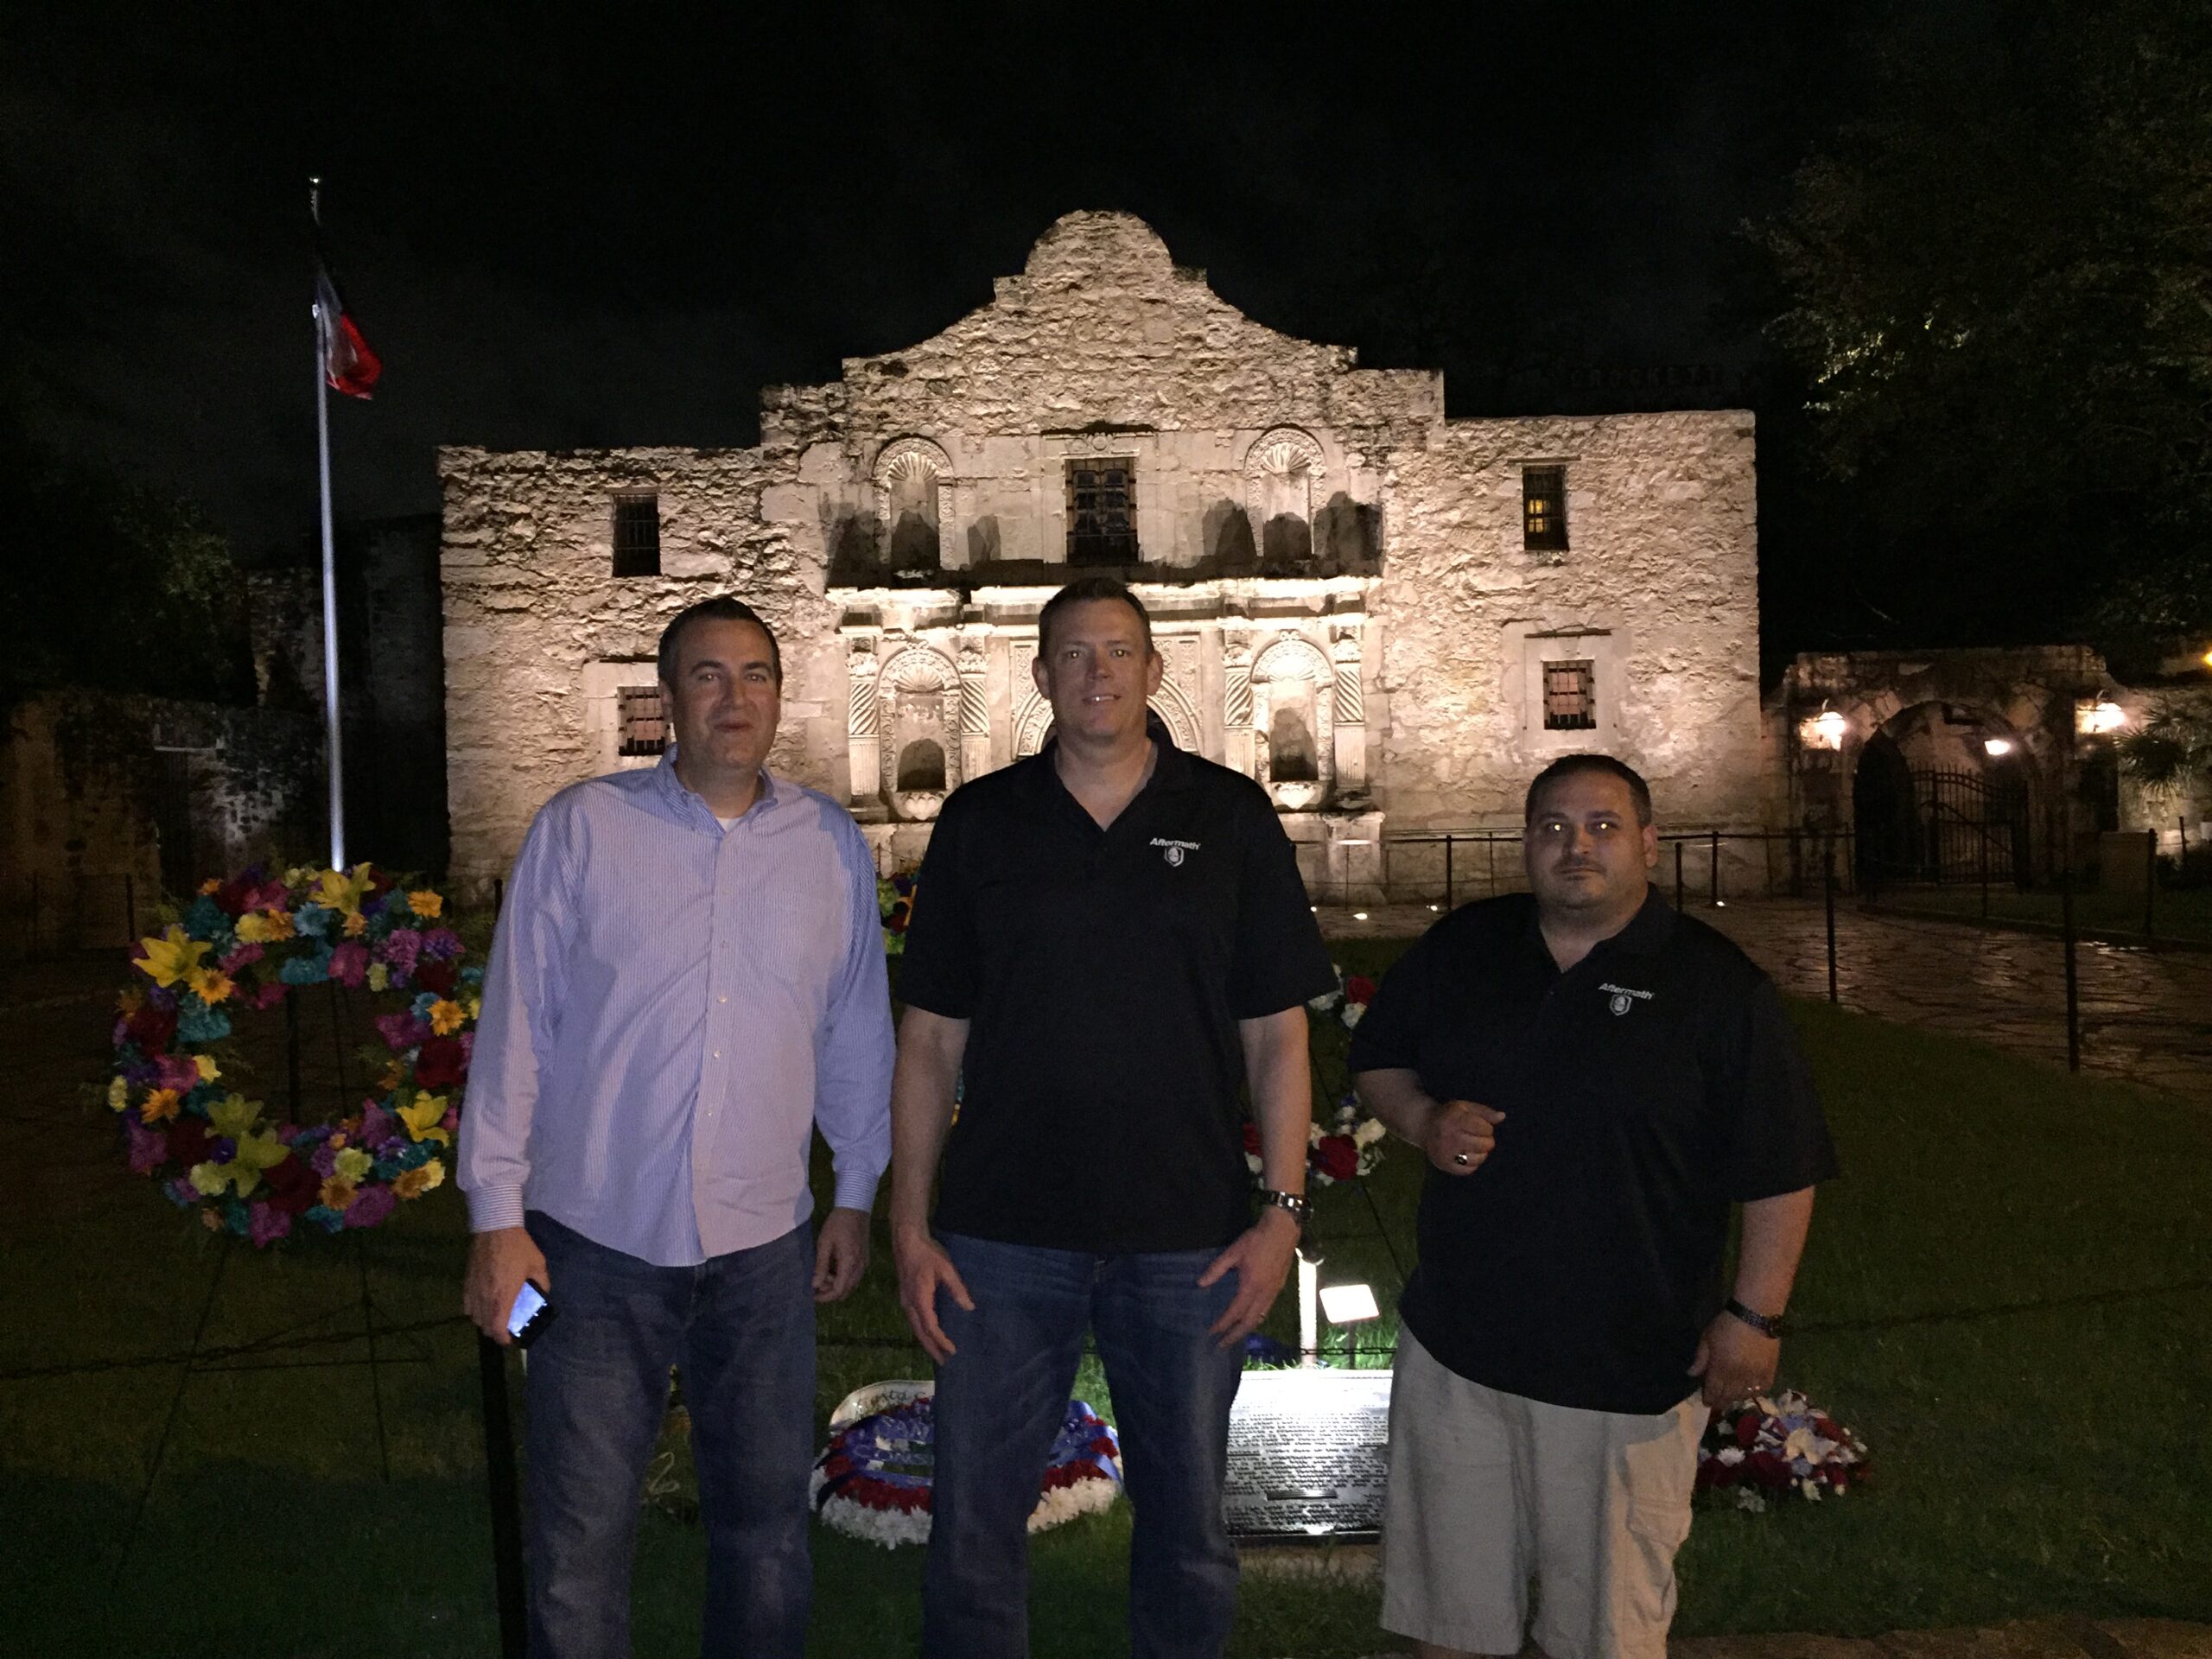 Aftermath visits the Alamo for PLRB 2016.